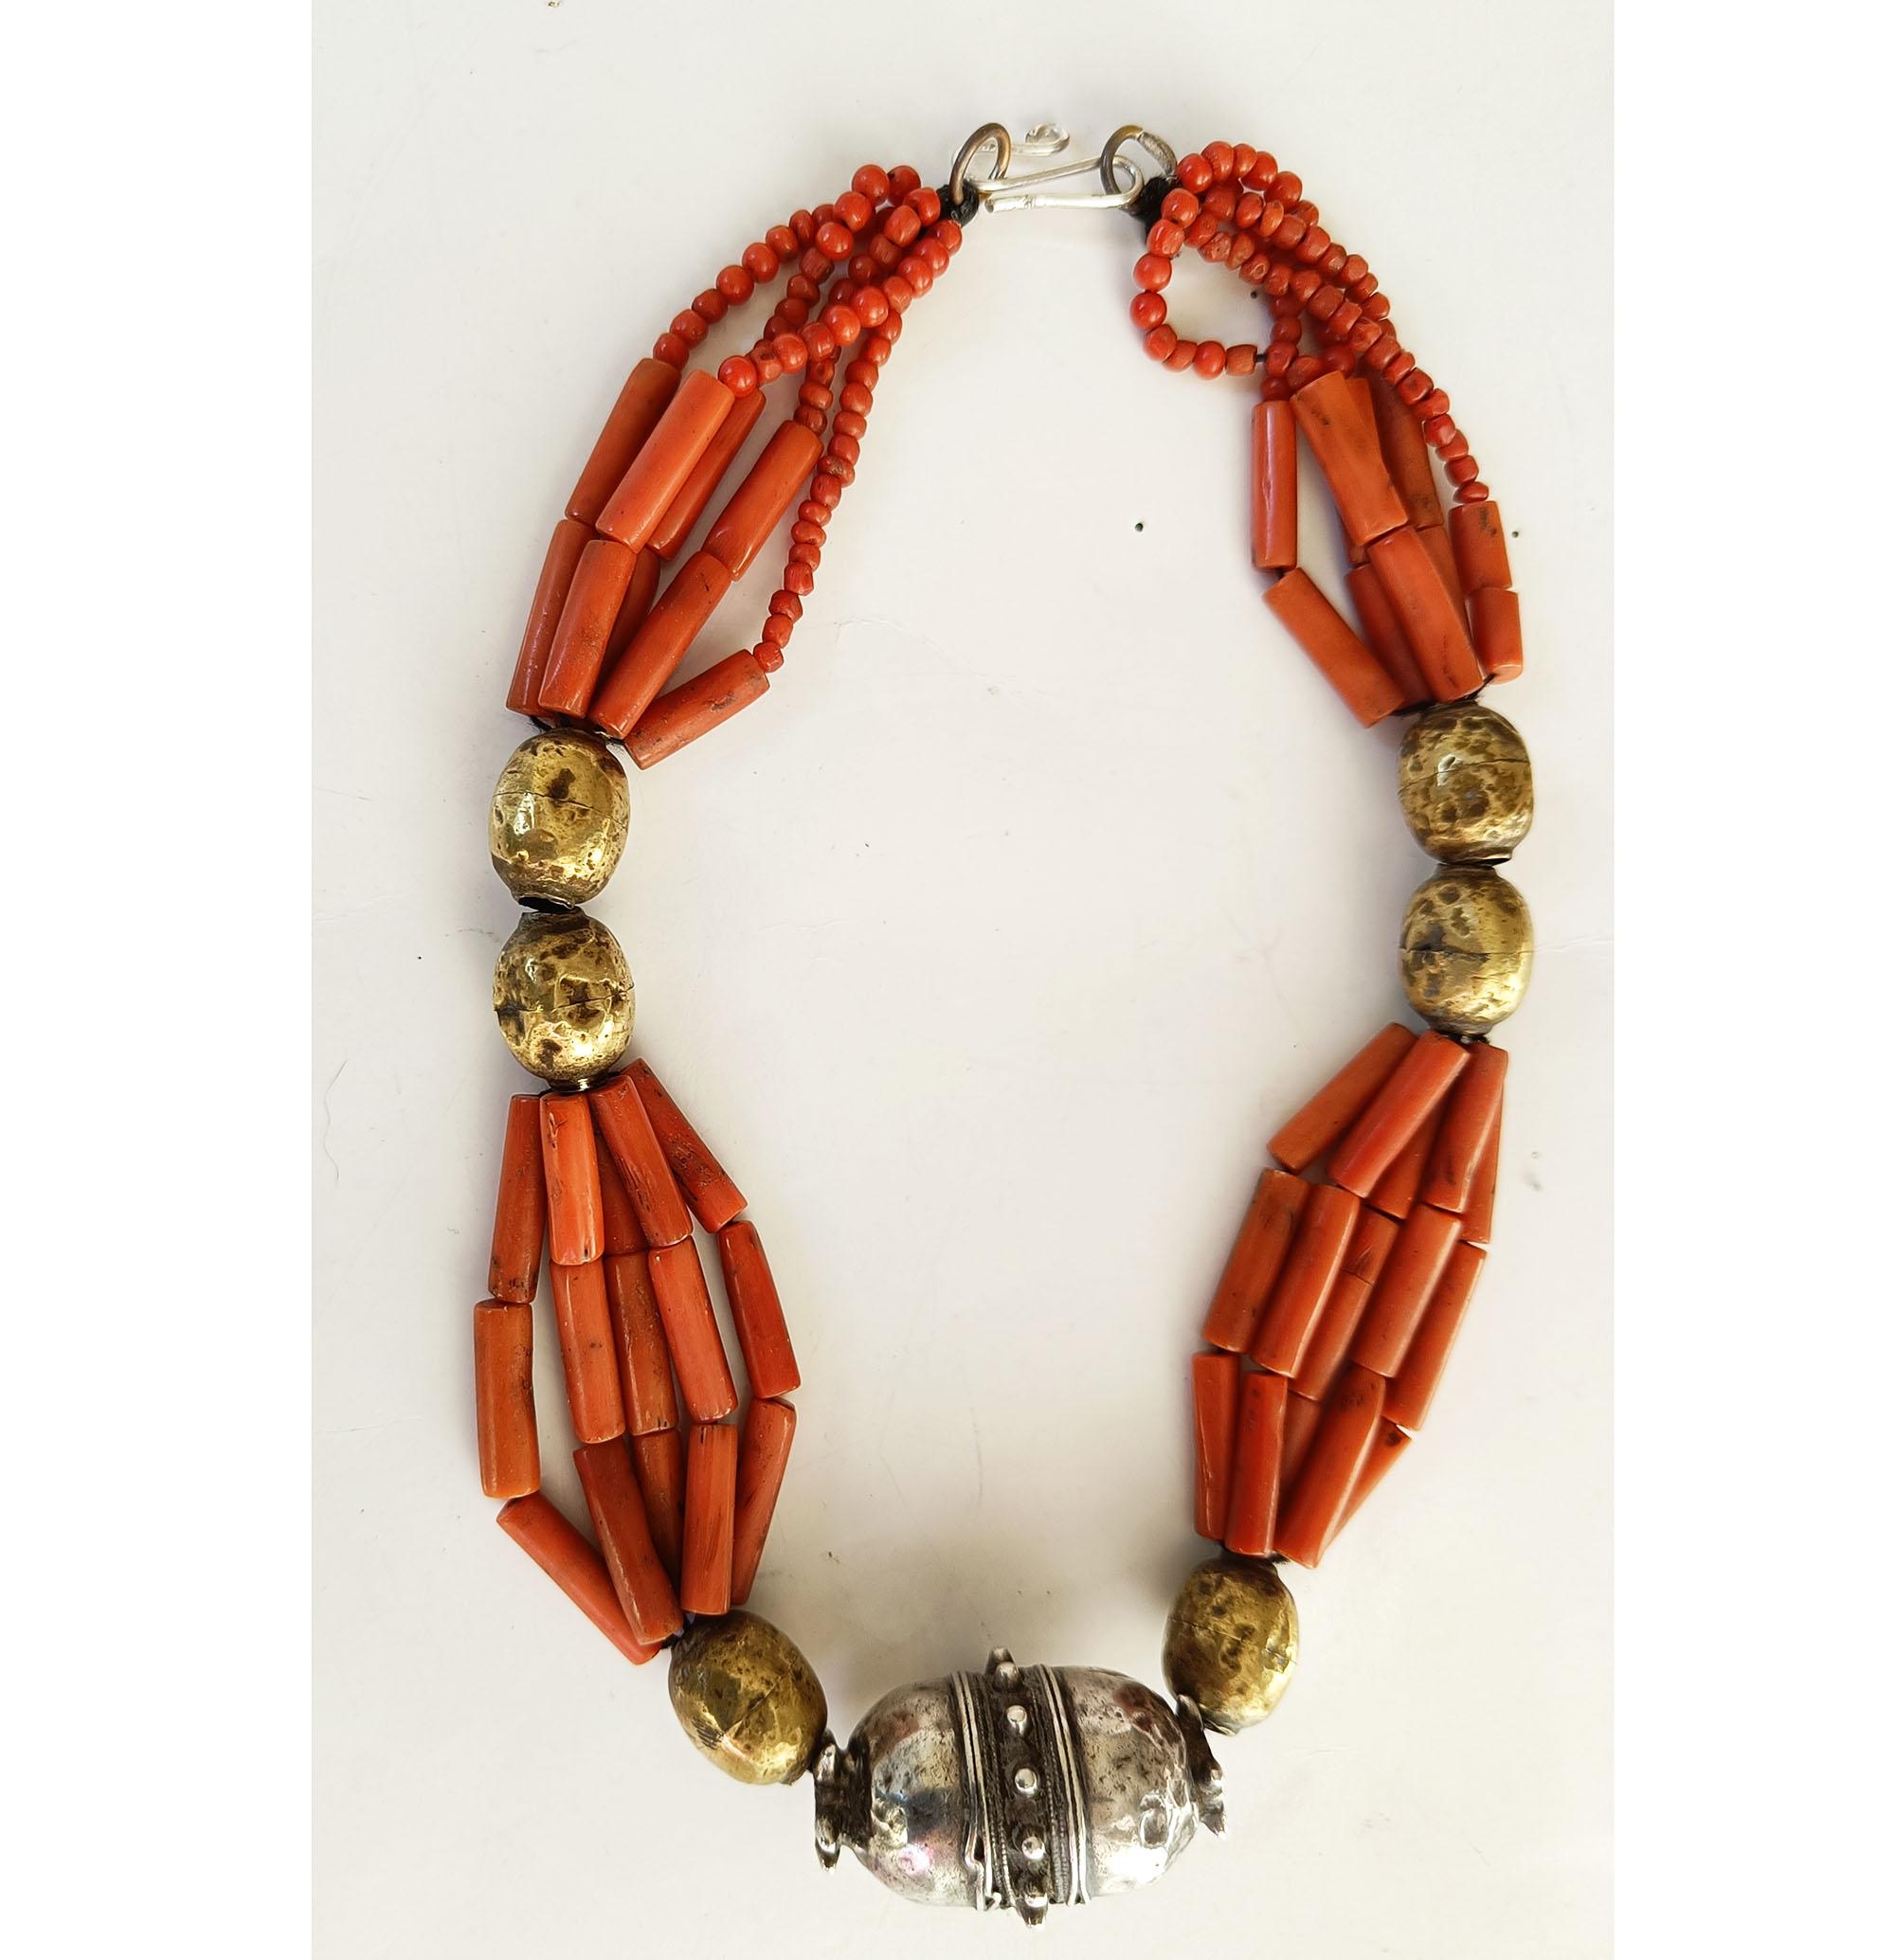  
Asian Ethnographic Tribal silver coral beaded necklace Vintage jewellery
A very nice antique Asian Ethnographic Tribal silver  gold gilt beads with long coral natural red tube beads and central silver bead  
Probably Afghanistan Period  19th